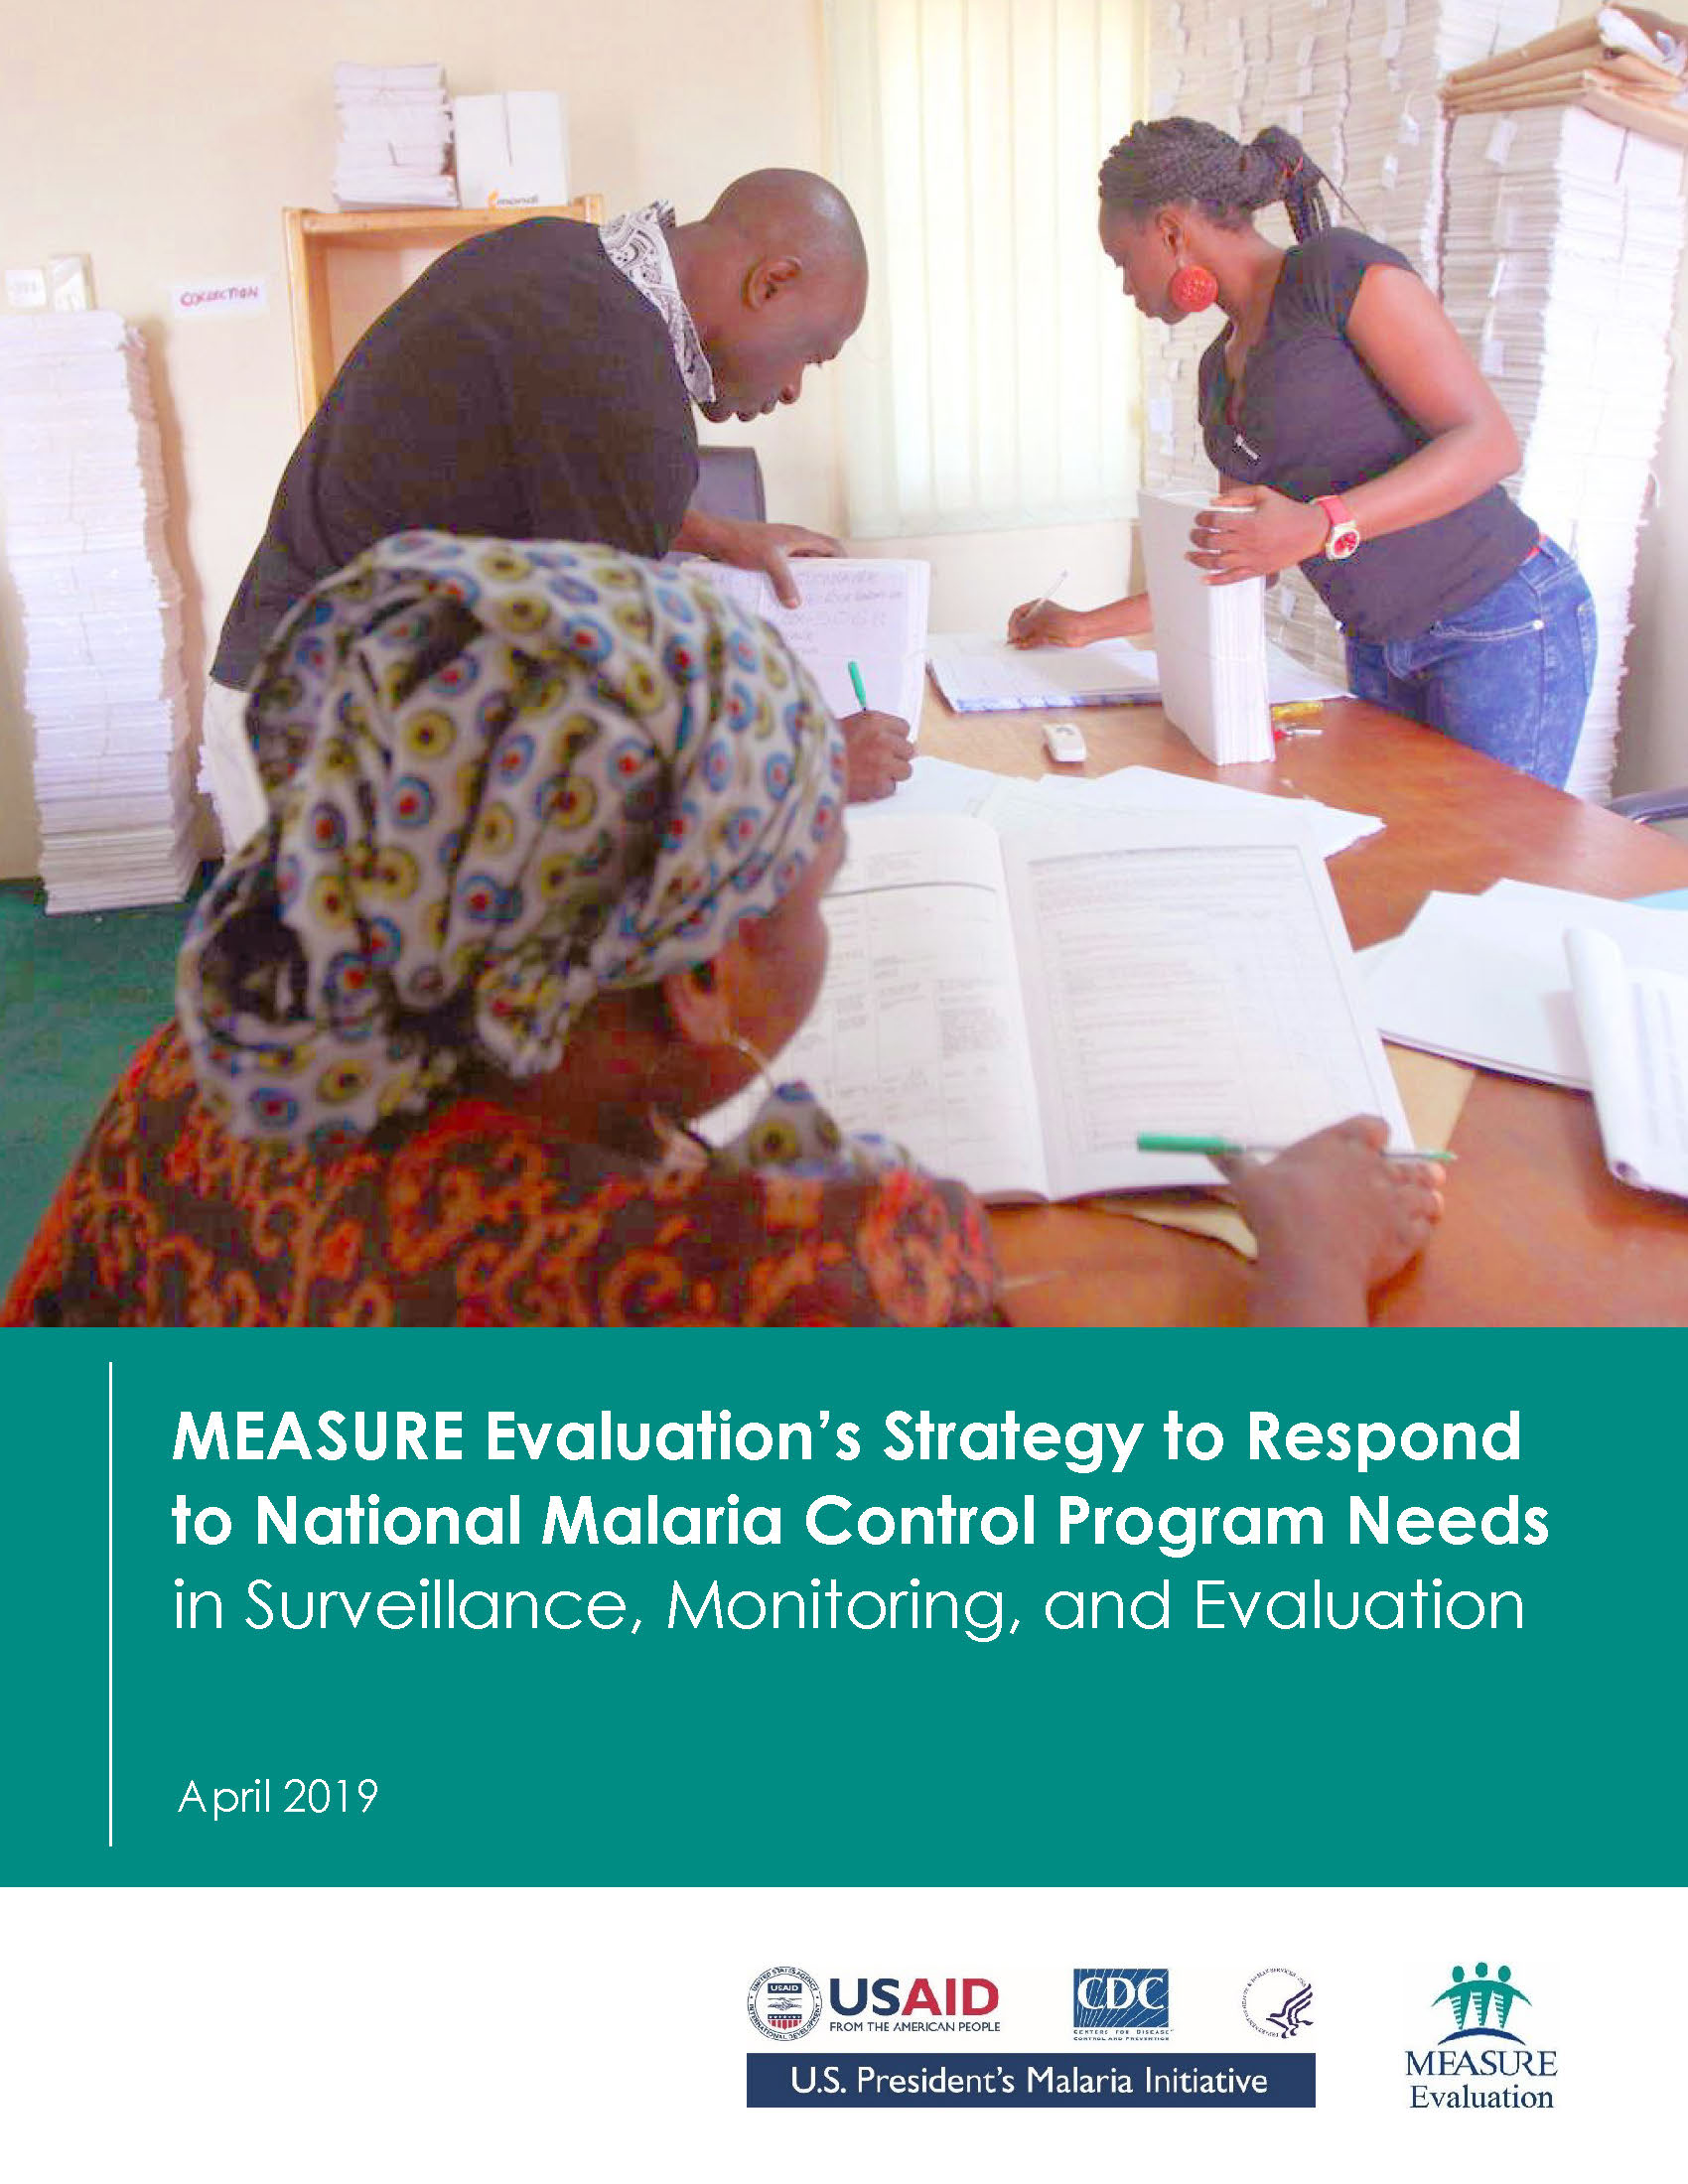 MEASURE Evaluations Strategy to Respond to National Malaria Control Program Needs in Surveillance, Monitoring, and Evaluation